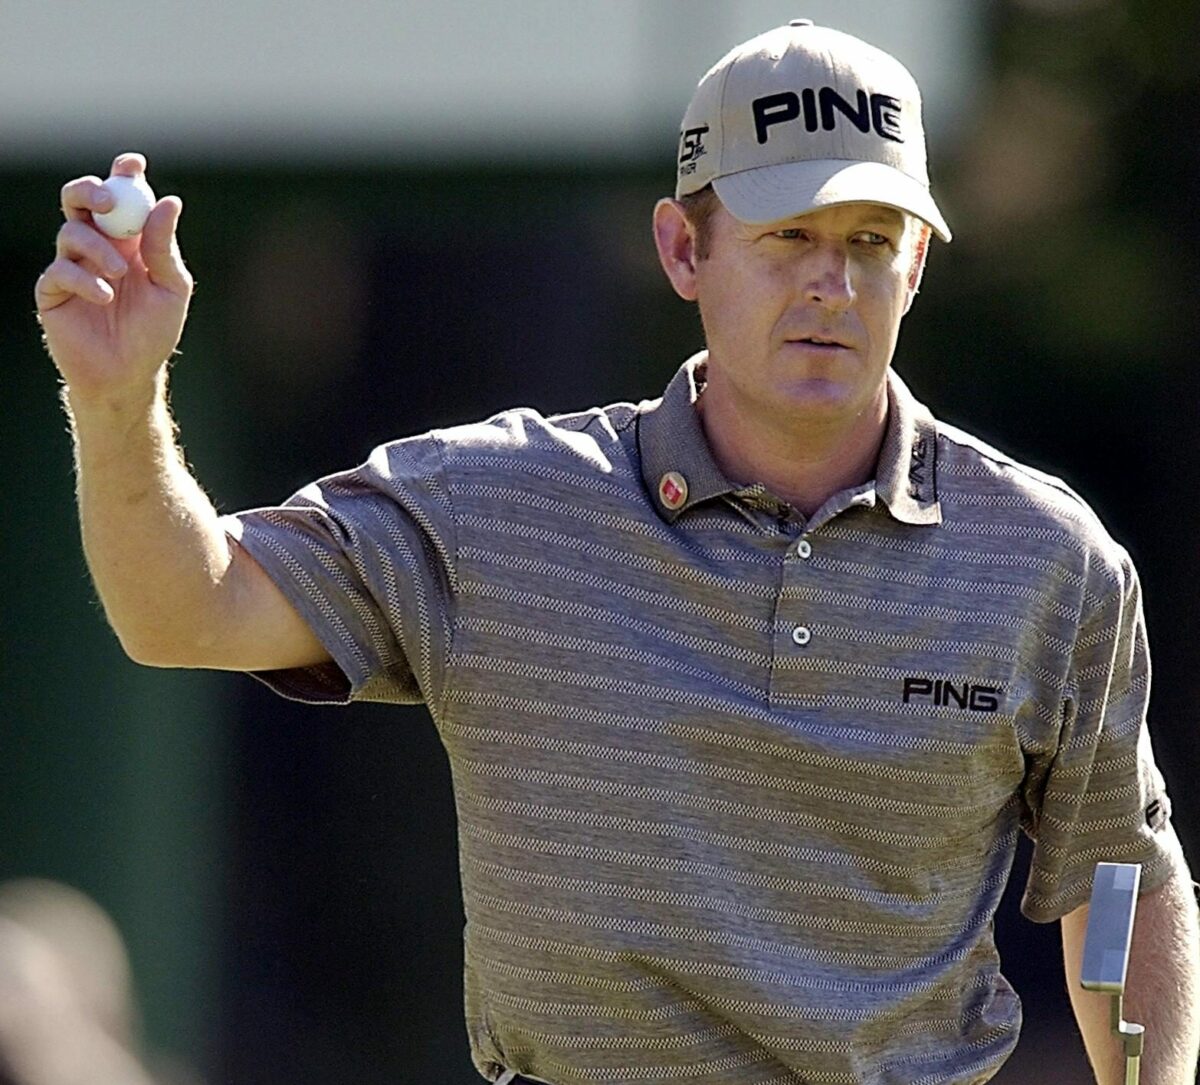 Jeff Maggert still has the one and only albatross at No. 13 at the Masters